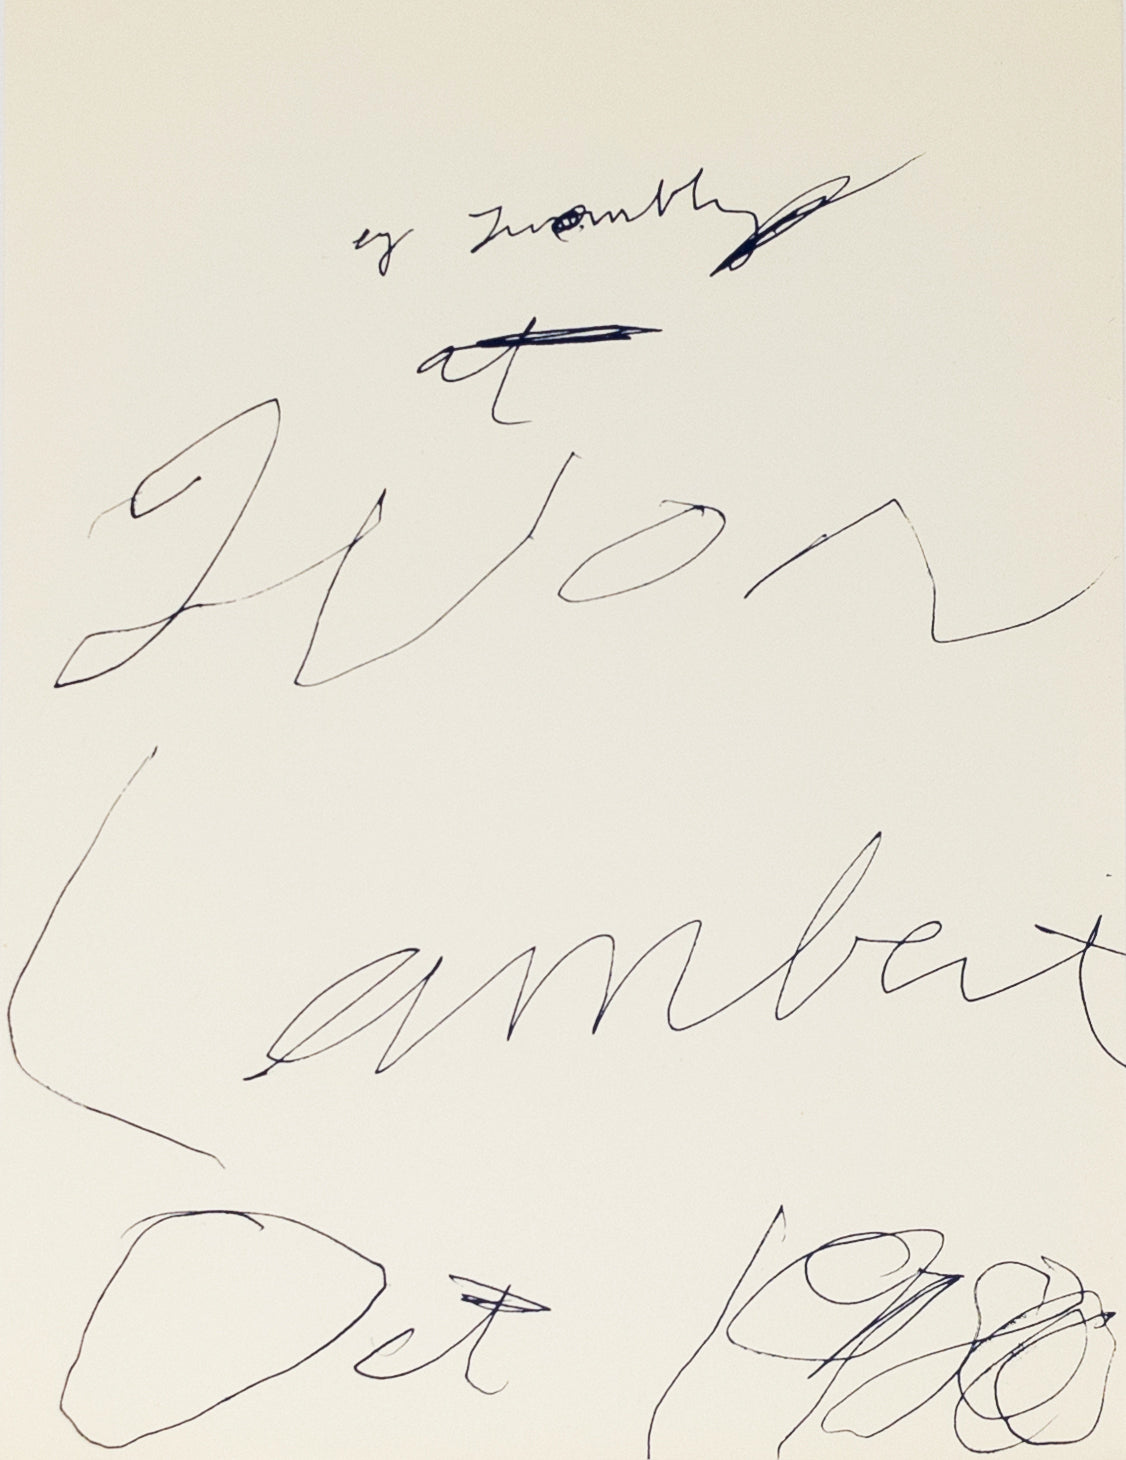 Cy Twombly - invitation print 1980